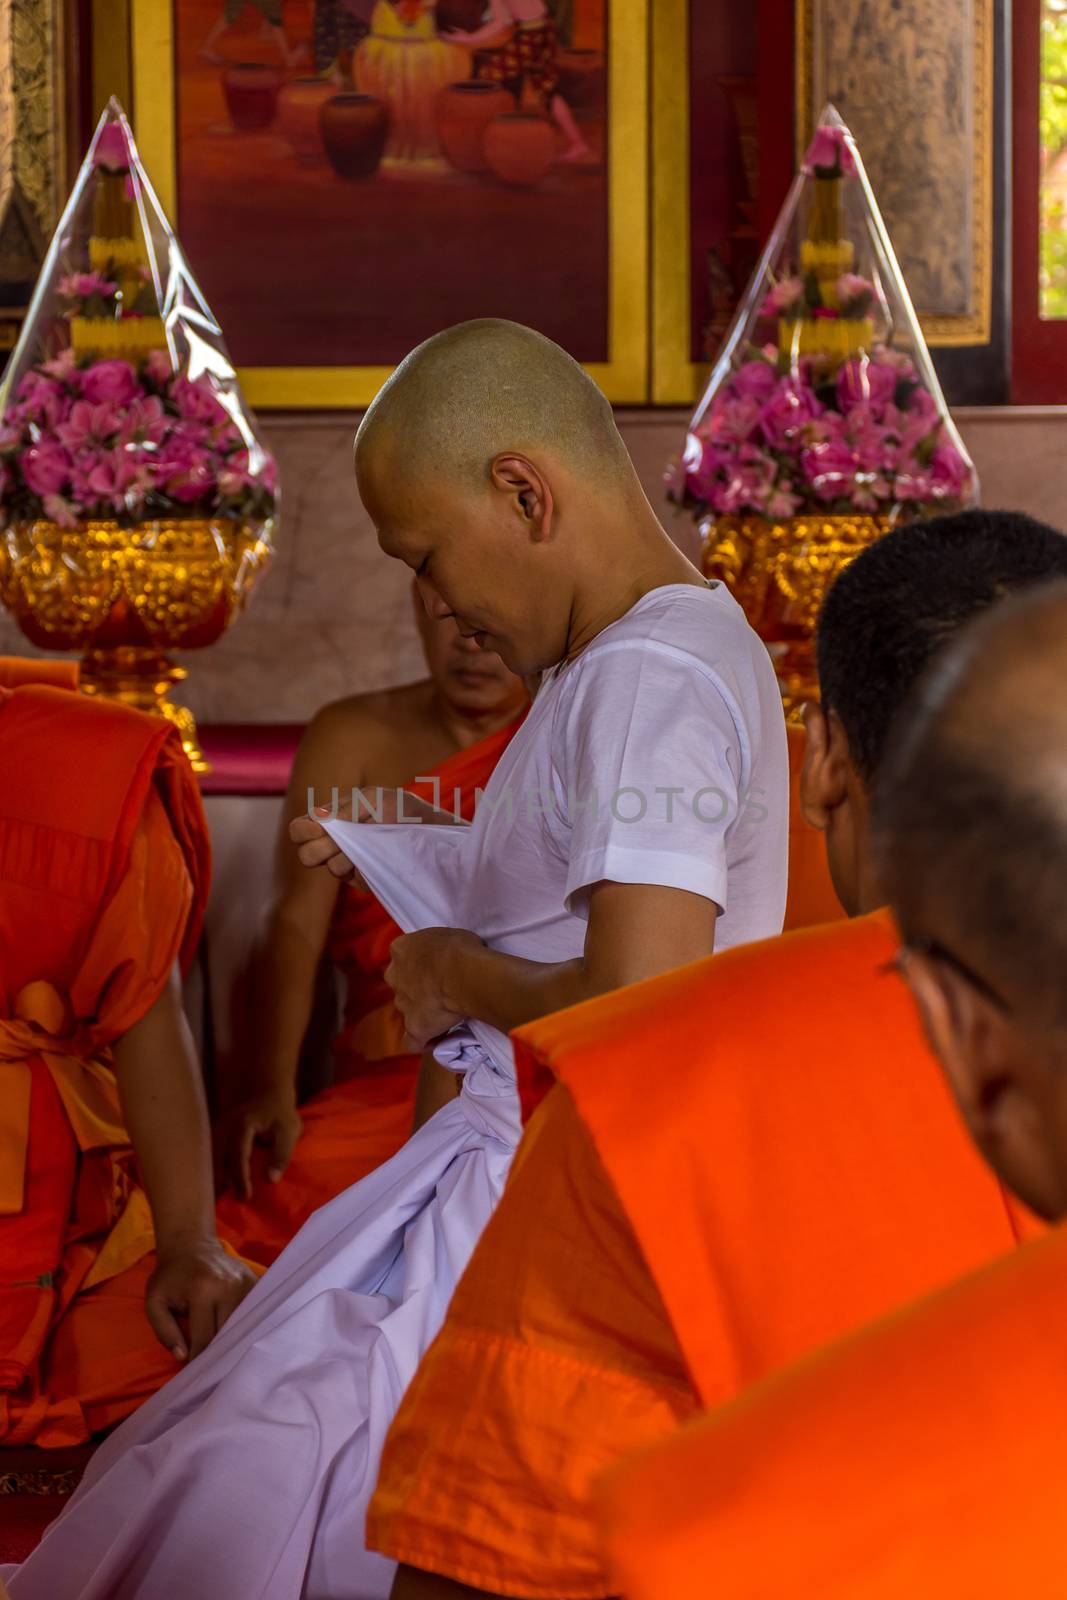 Bangkok, Thailand - July 9, 2016 : Thai monk ritual for change man to monk in ordination ceremony in buddhist in Thailand